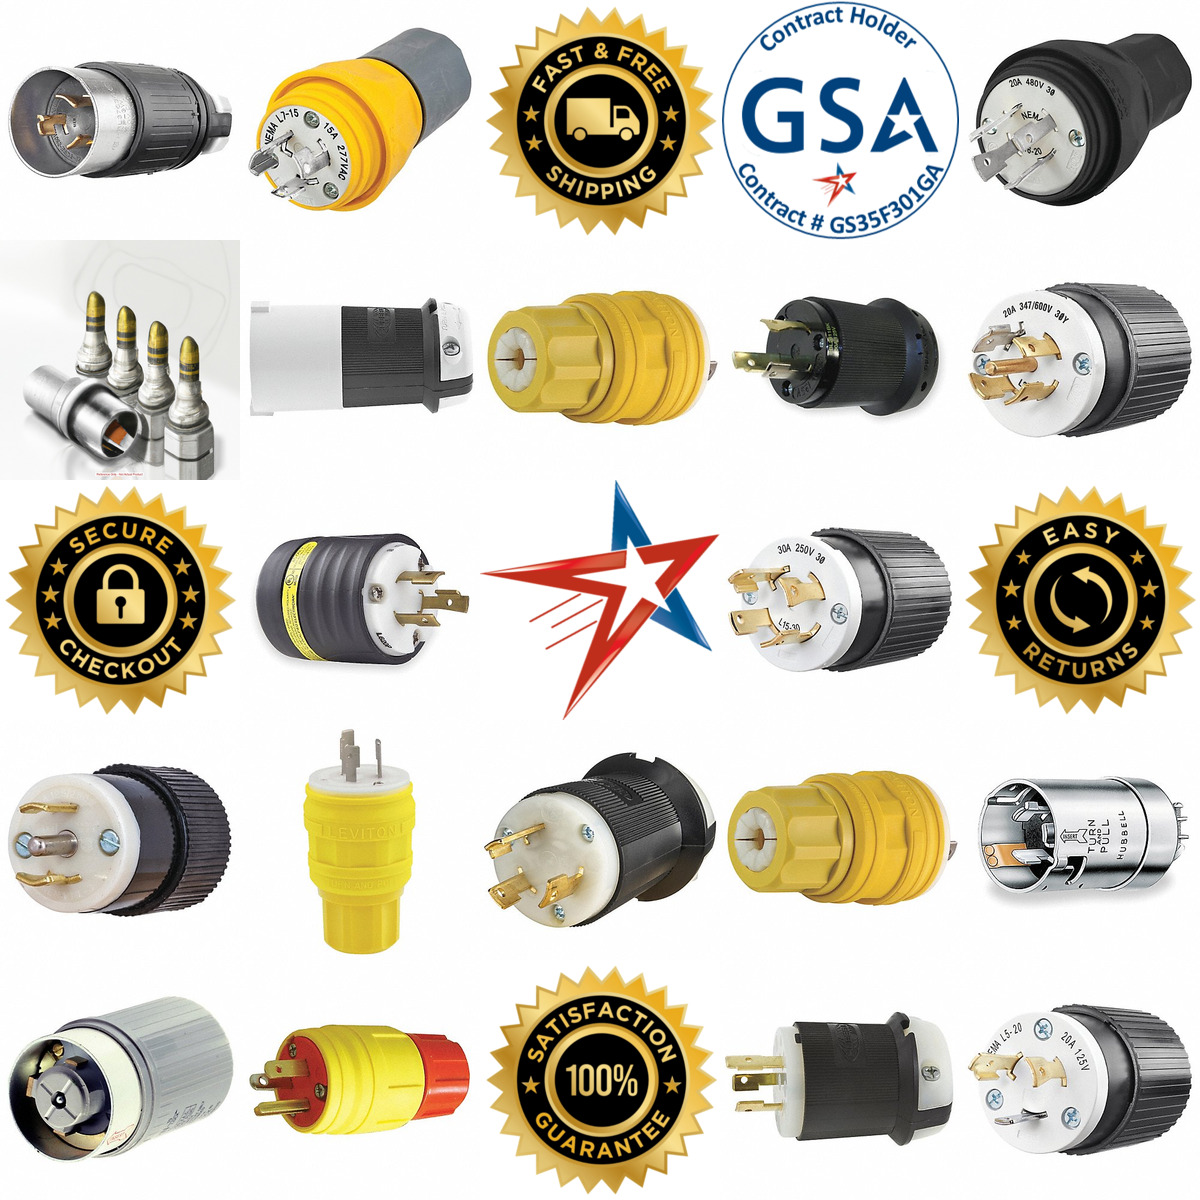 A selection of Locking Plugs products on GoVets